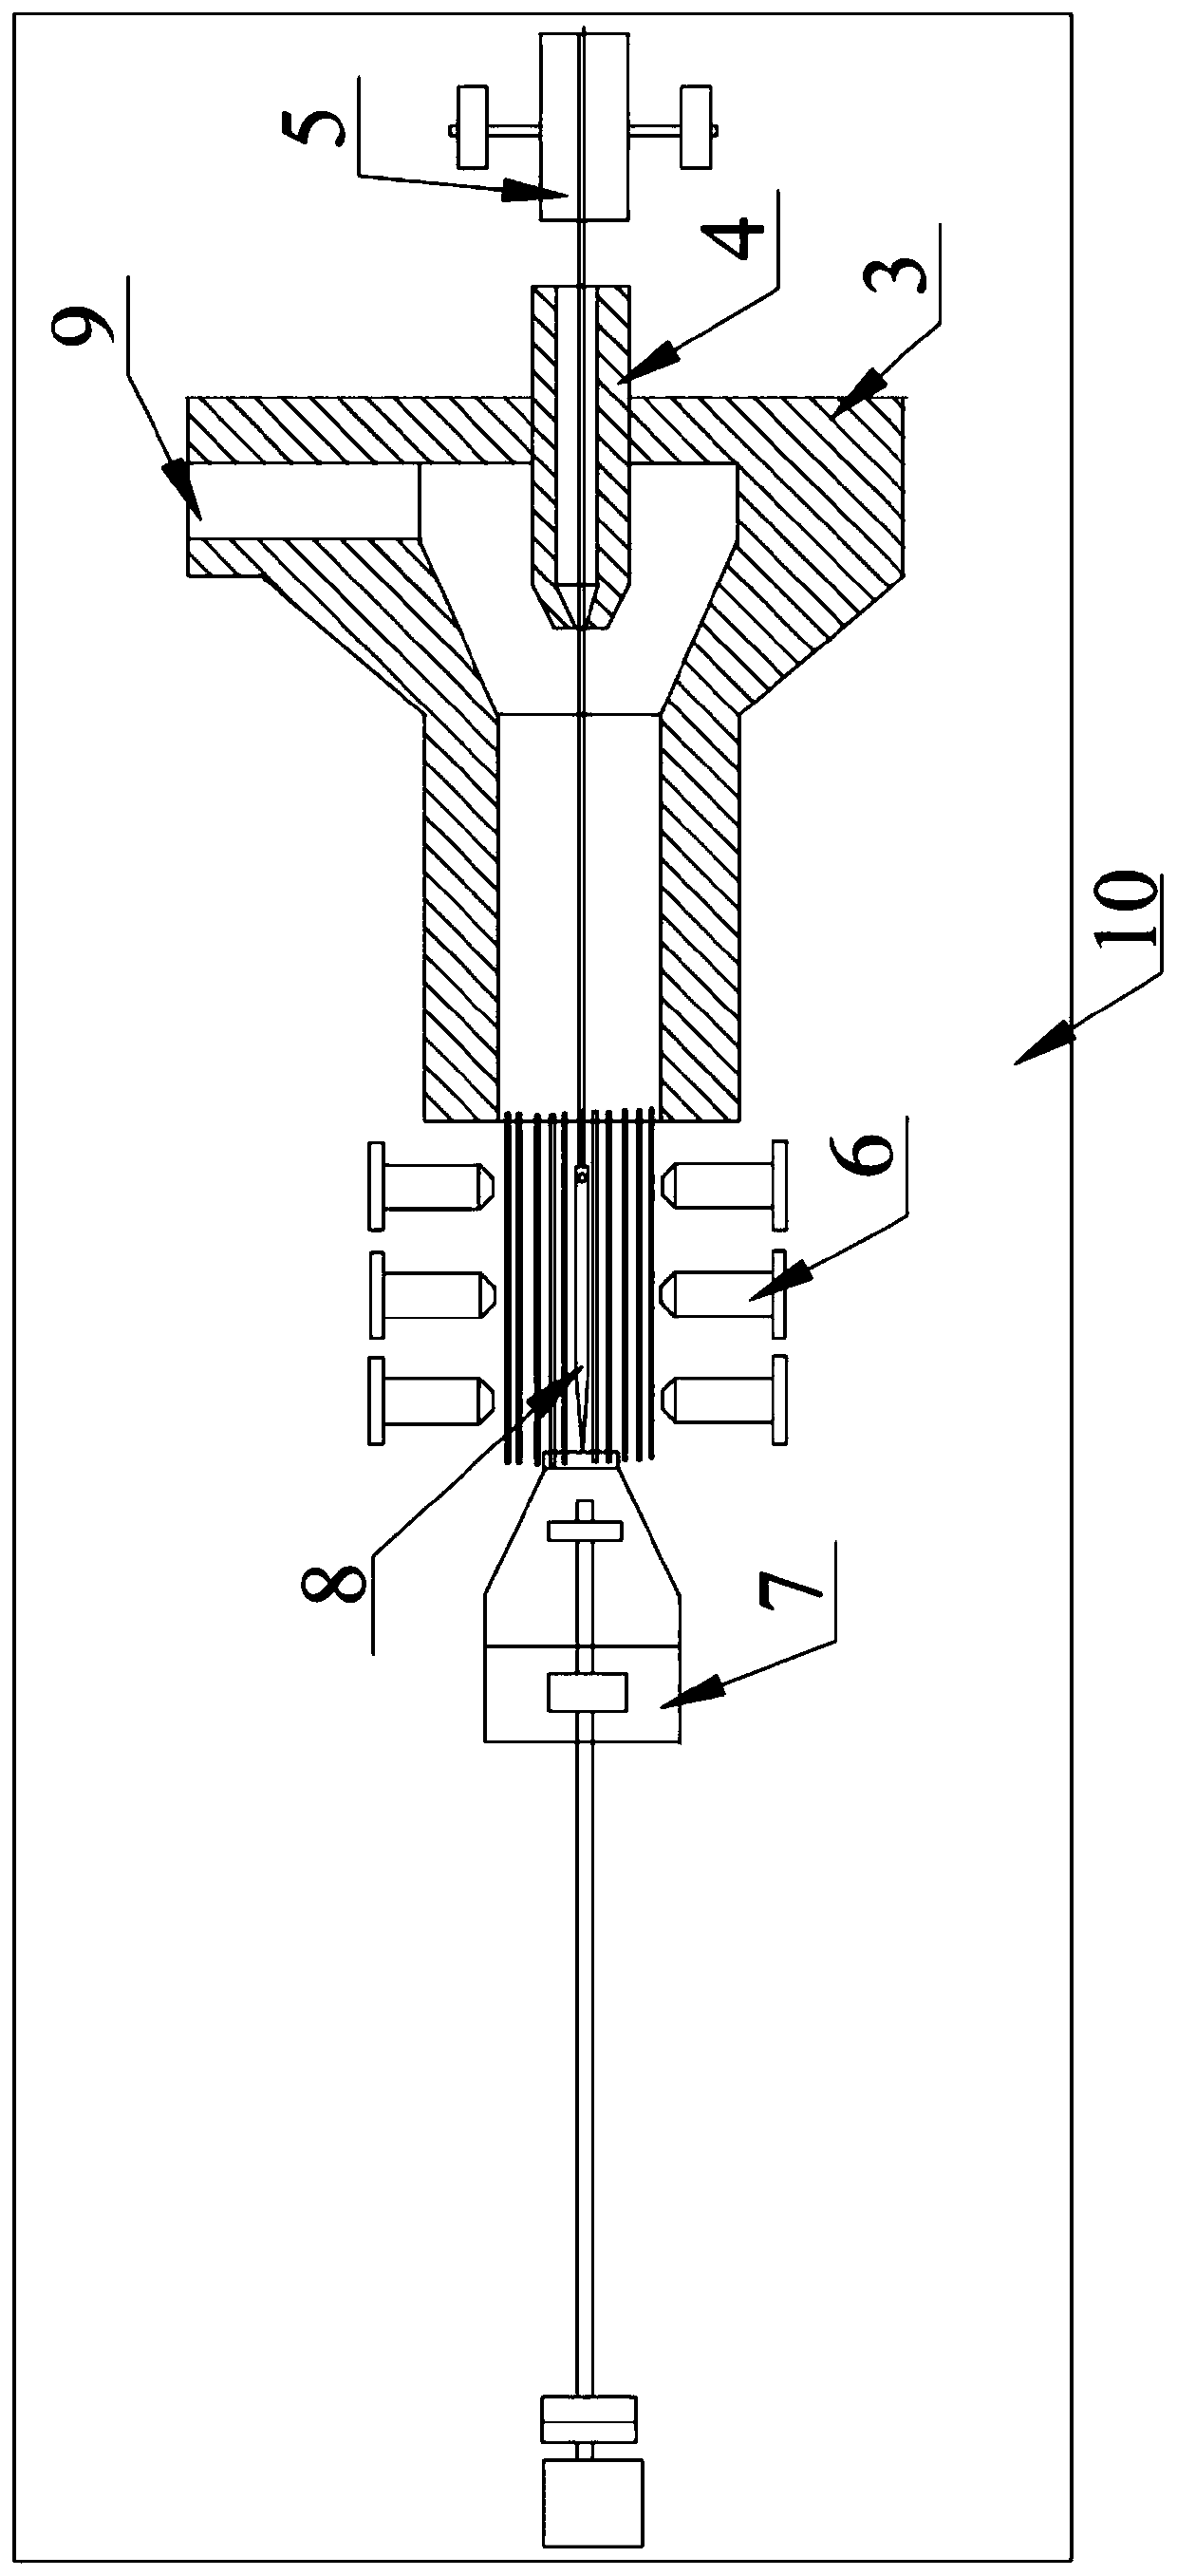 A variable-section spring blank, processing tooling and processing technology